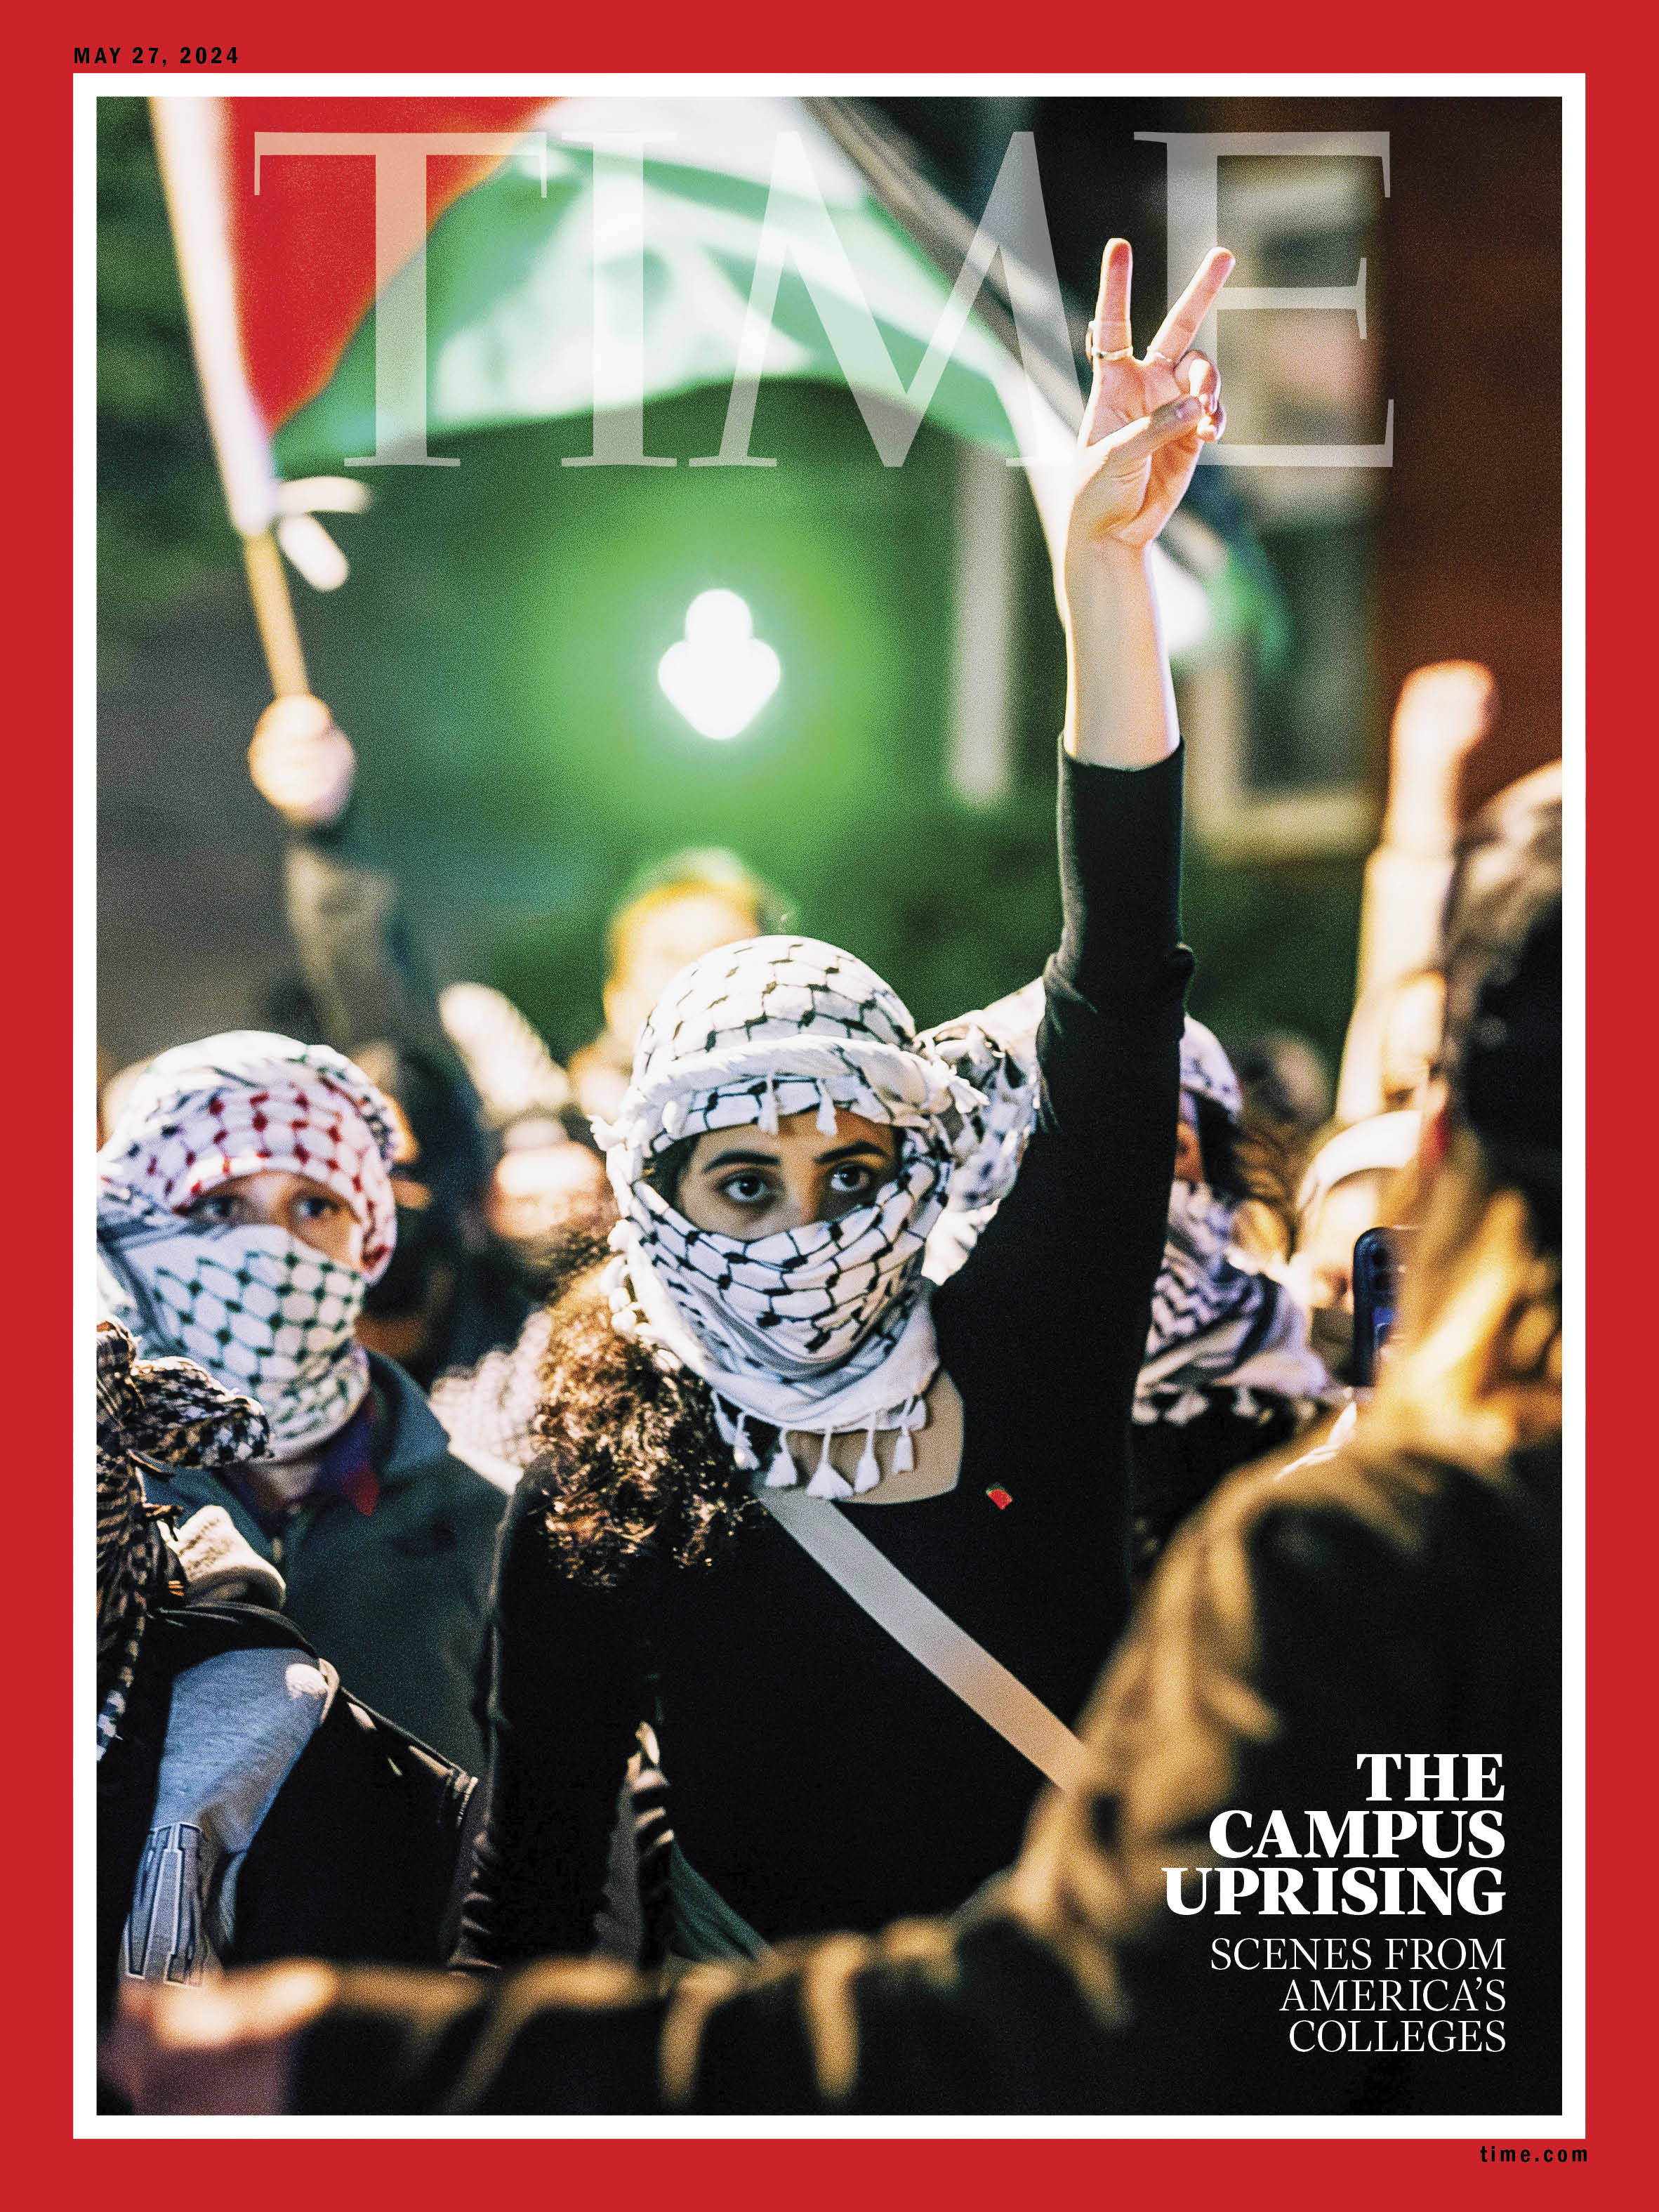 the story behind time's campus protests cover